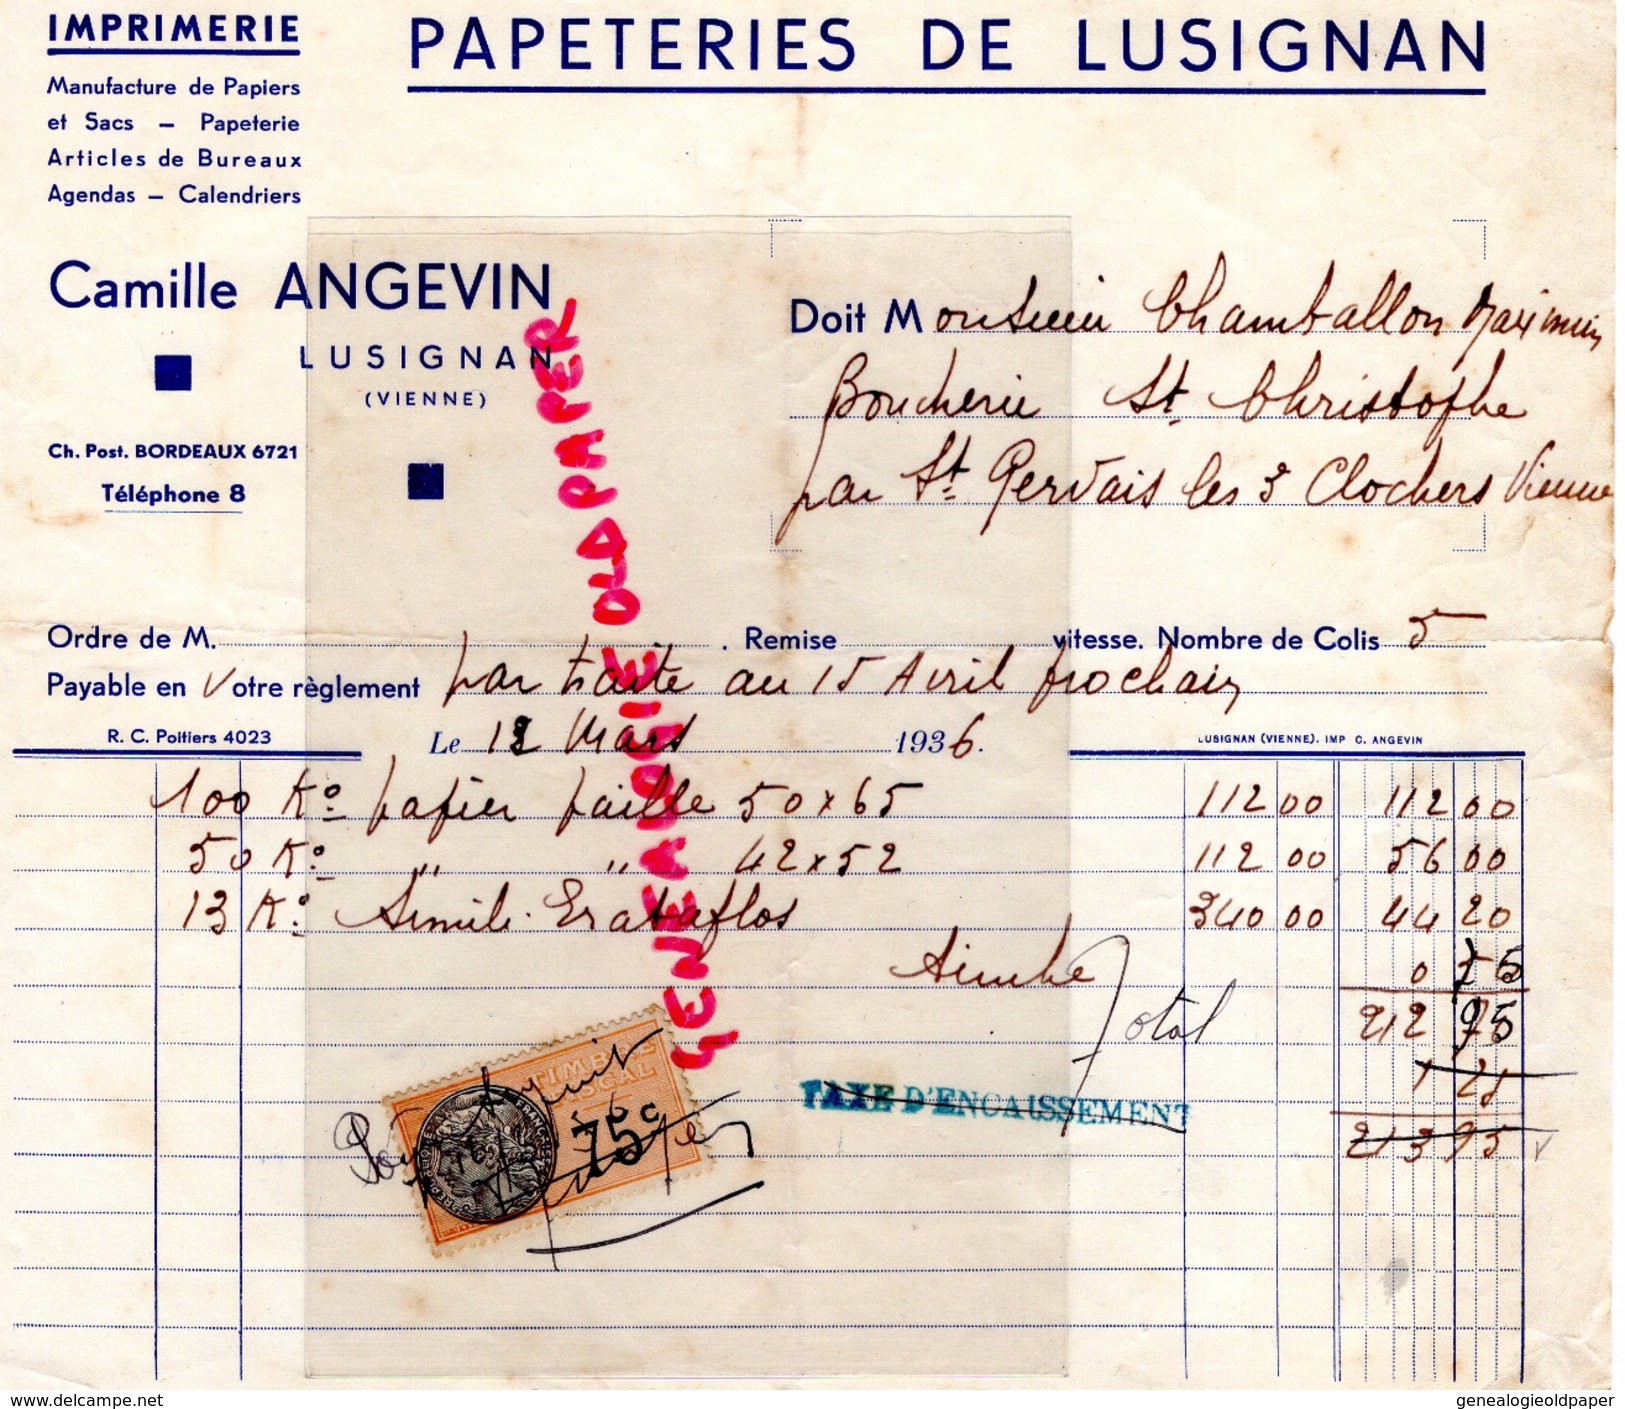 86- LUSIGNAN-FACTURE PAPETERIES DU LUSIGNAN- IMPRIMERIE CAMILLE ANGEVIN- PAPETERIE -1936-CHAMBALLON MAXIMIN ST GERVAIS - Printing & Stationeries